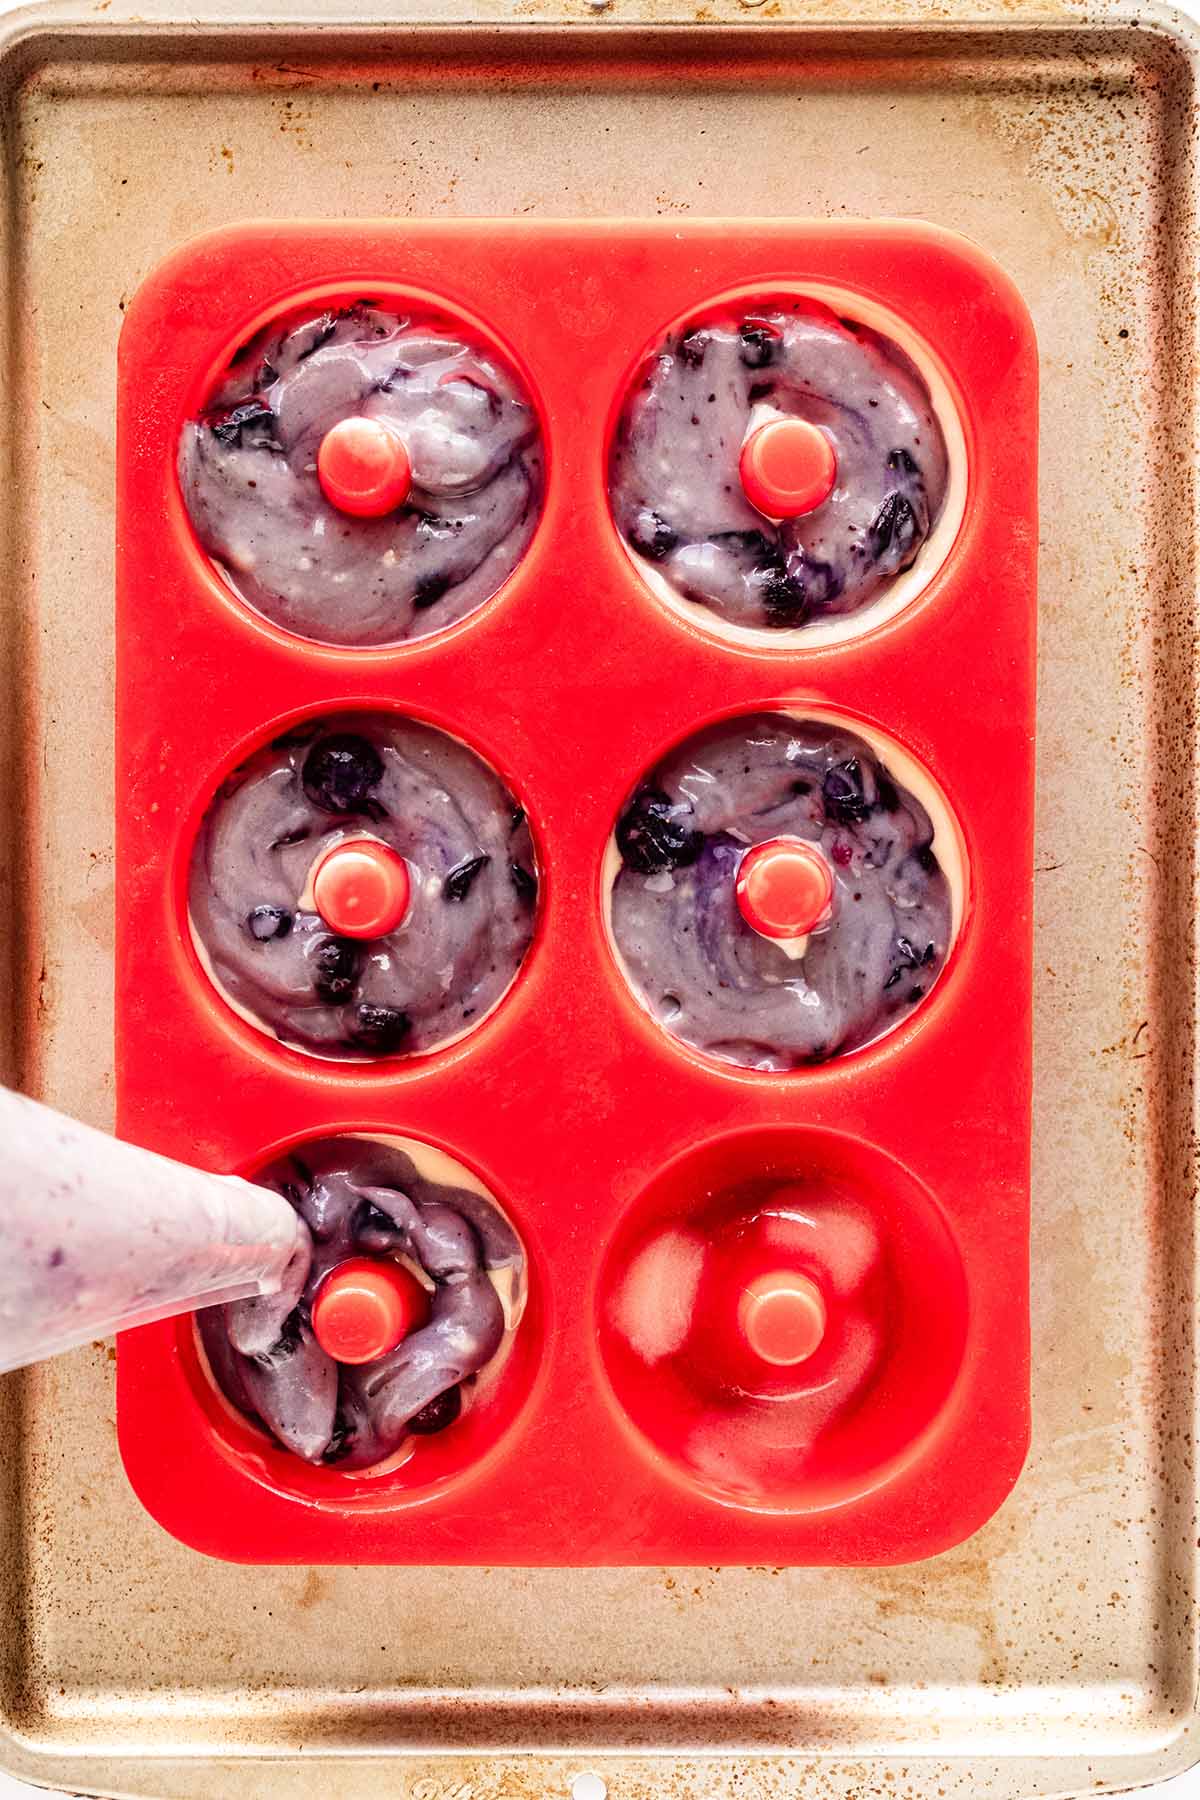 In a batter, blueberry donuts flow into a donut mold